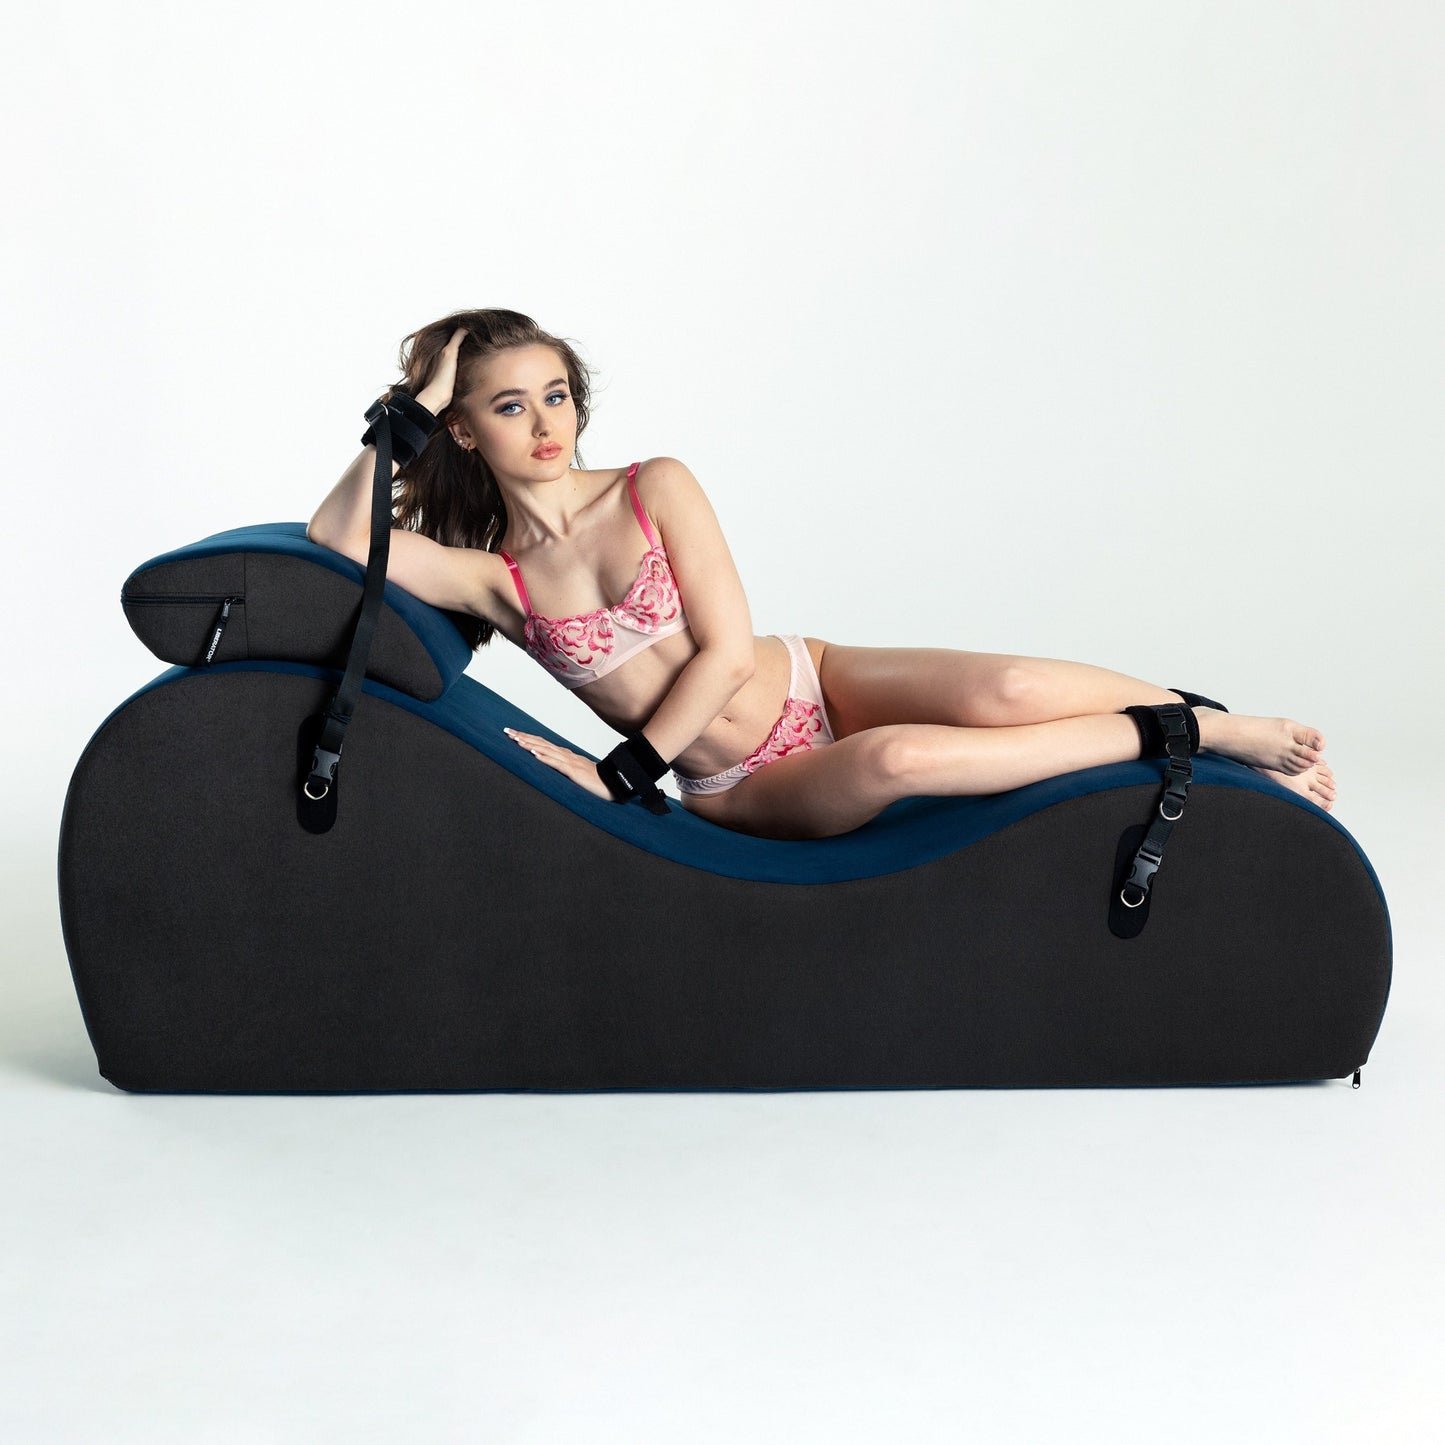 Liberator Lyza Sex Lounger Valkyrie Edition - Thorn & Feather